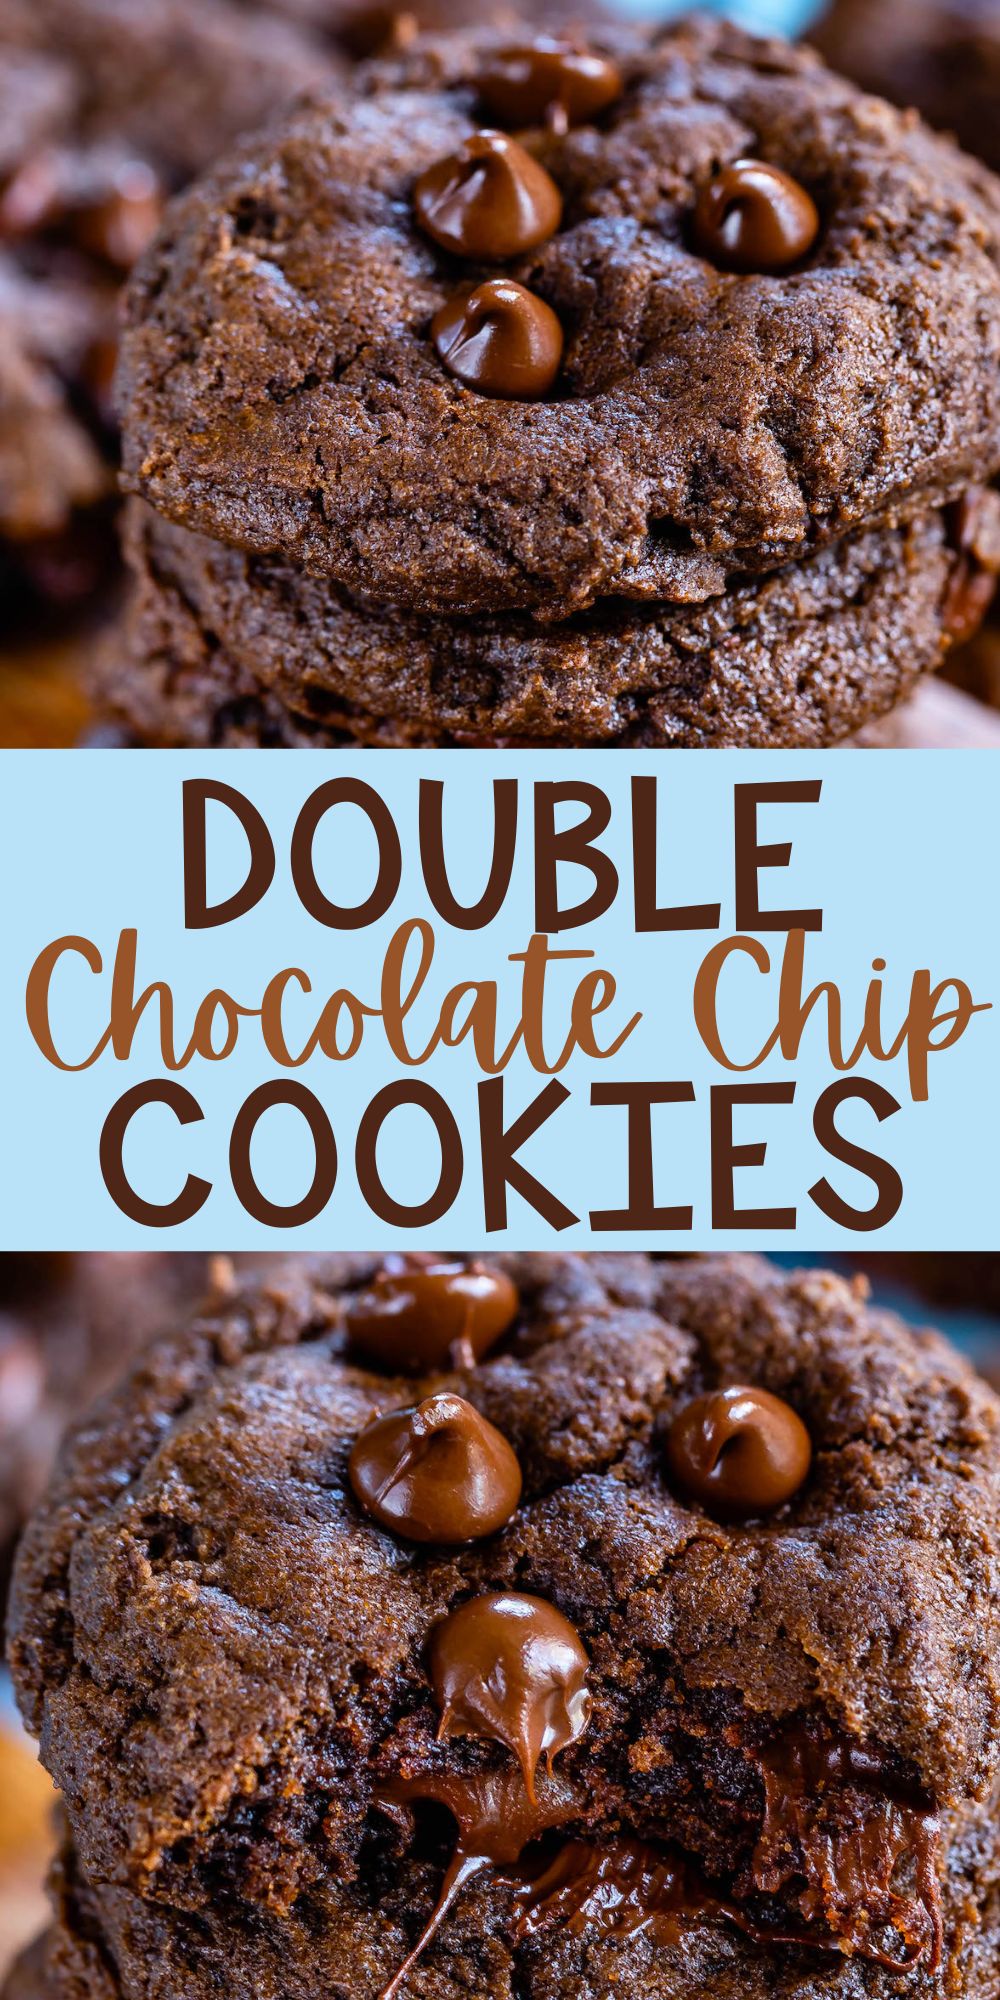 two photos of stacked chocolate cookies with chocolate chips baked in with words on the image.